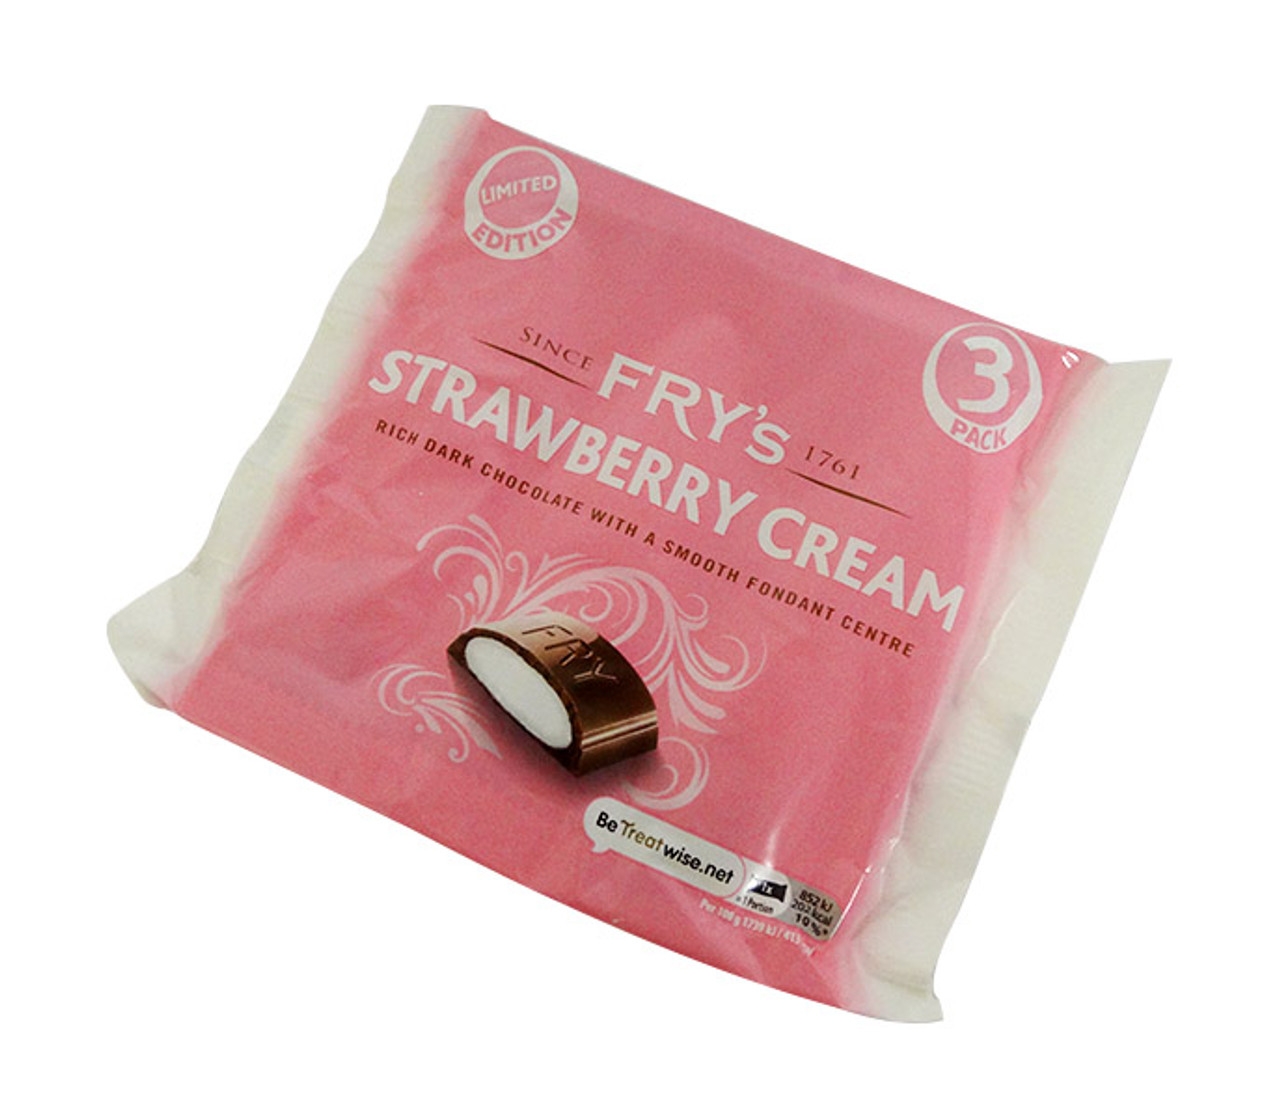 Fry S Orange Cream 3 Pack And Other Confectionery At Australias Cheapest Prices Are Ready To